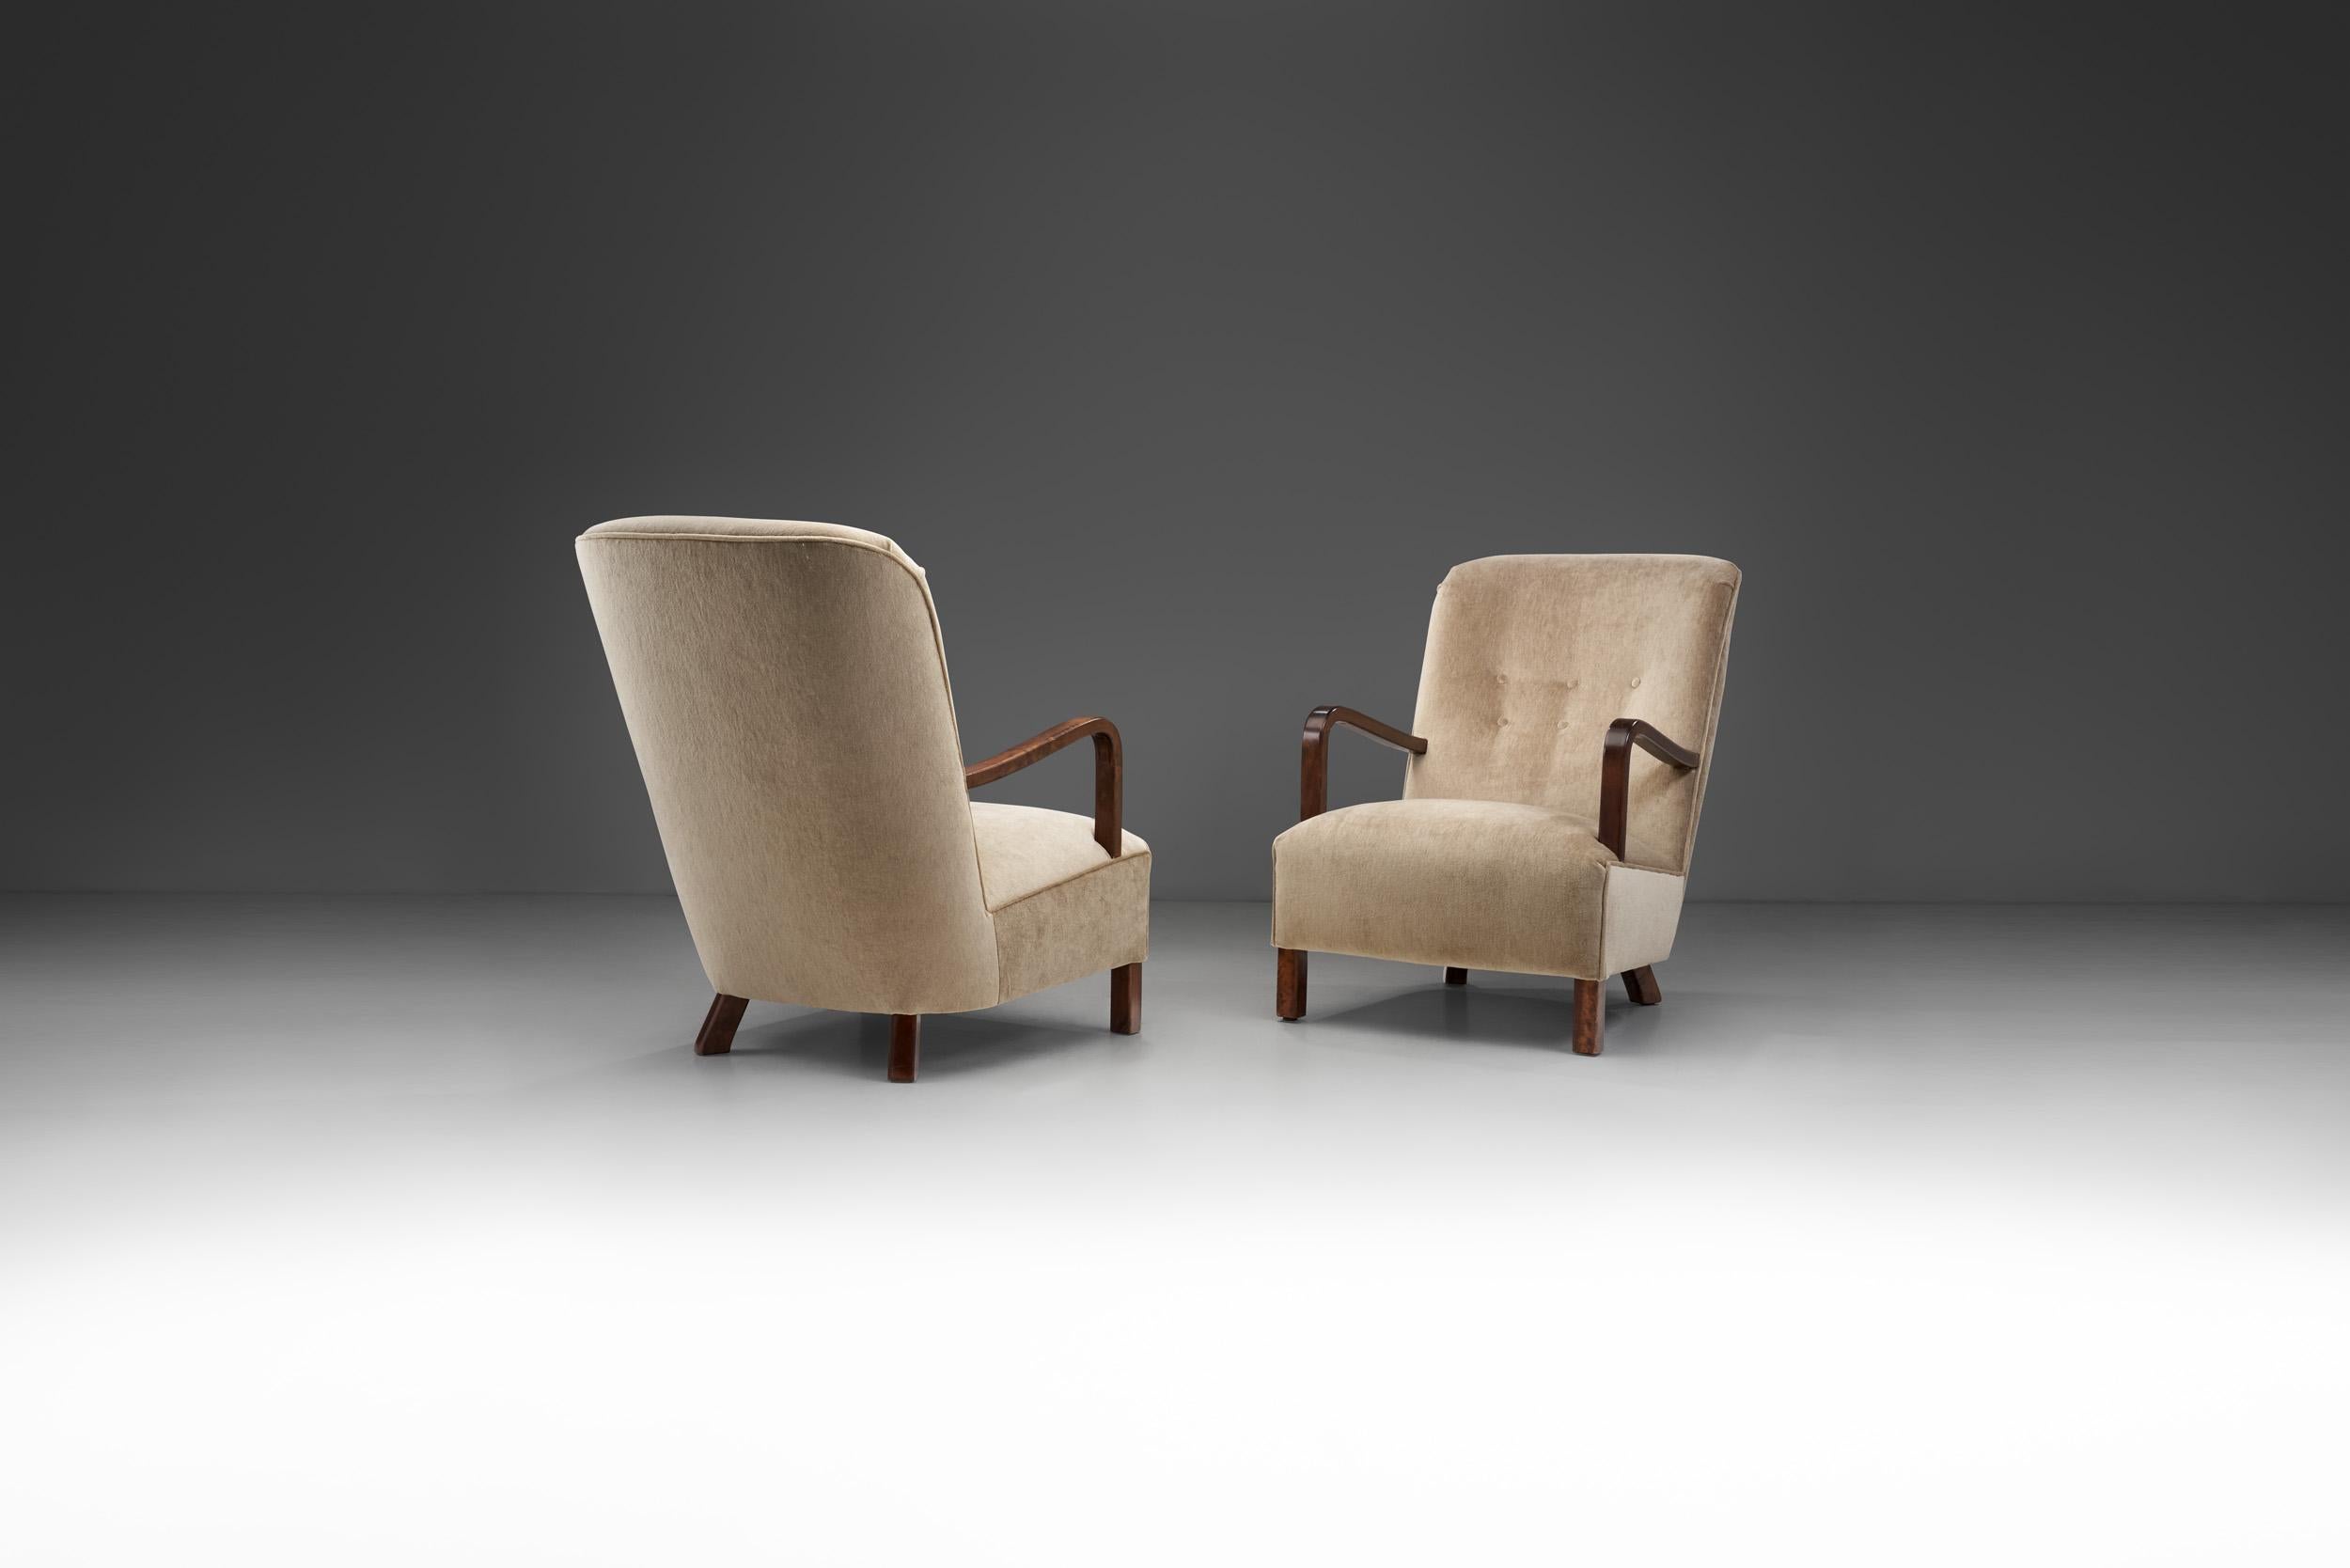 Mid-Century Modern Upholstered Lounge Chairs with Sculptural Arms, Europe ca 1940s For Sale